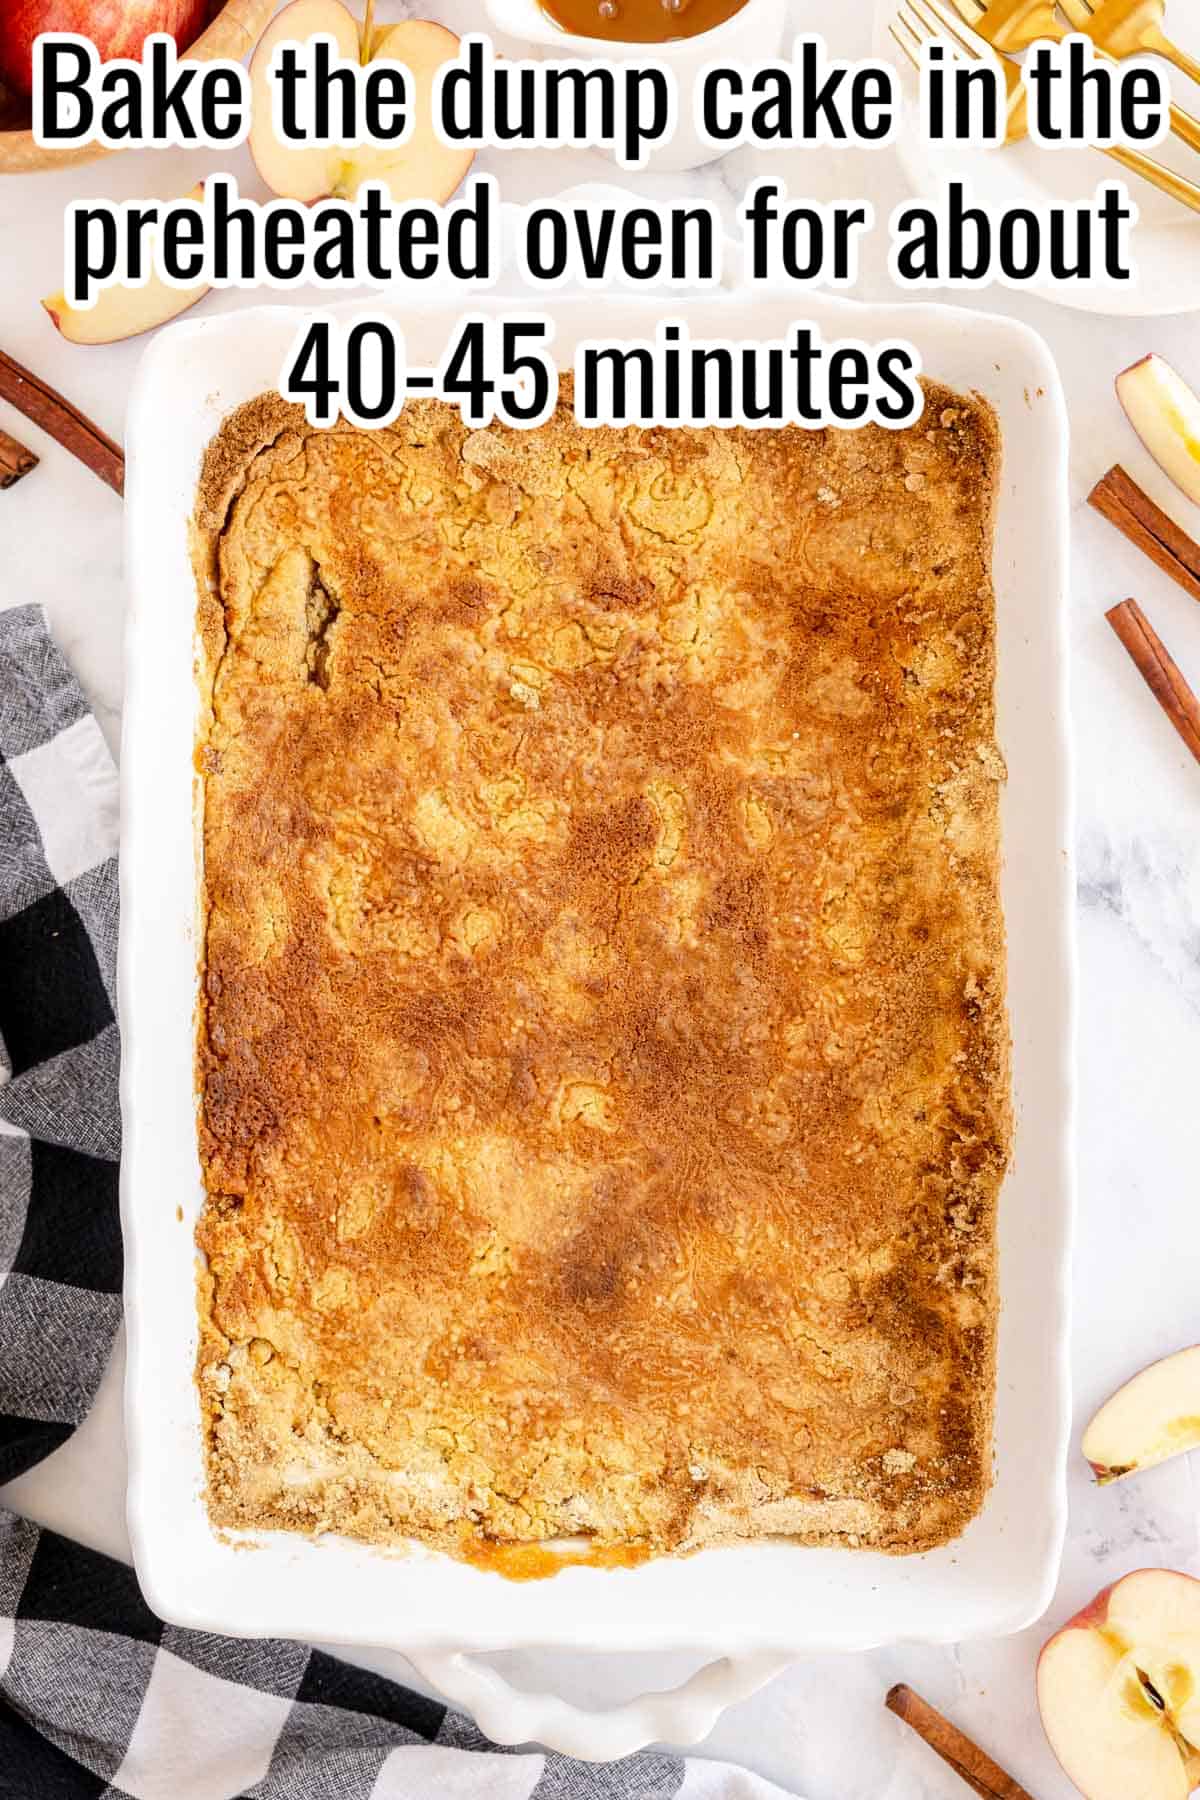 Bake the Apple Dump Cake in the preheated oven for about 40-45 minutes.